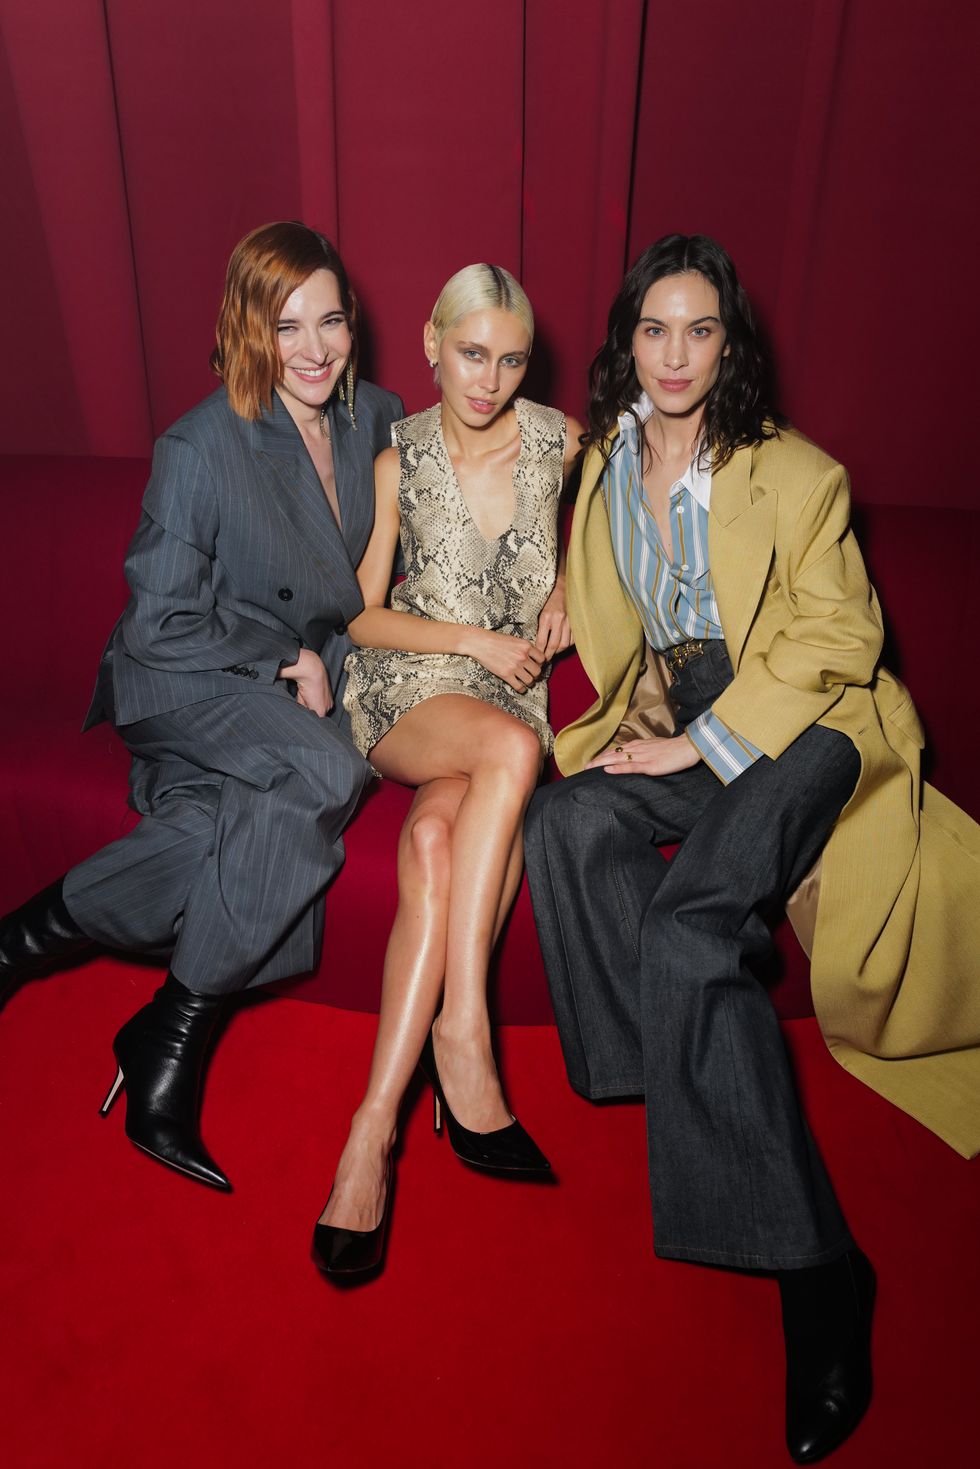 hari nef, iris law and alexa chung attended the launch party for hm studio´s temporary exhibition in paris open to the public from february 27 until february 29, the ‘la maison’ space in paris has been designed to create visually arresting moments that enhance the cutting edge aesthetic of hm studio